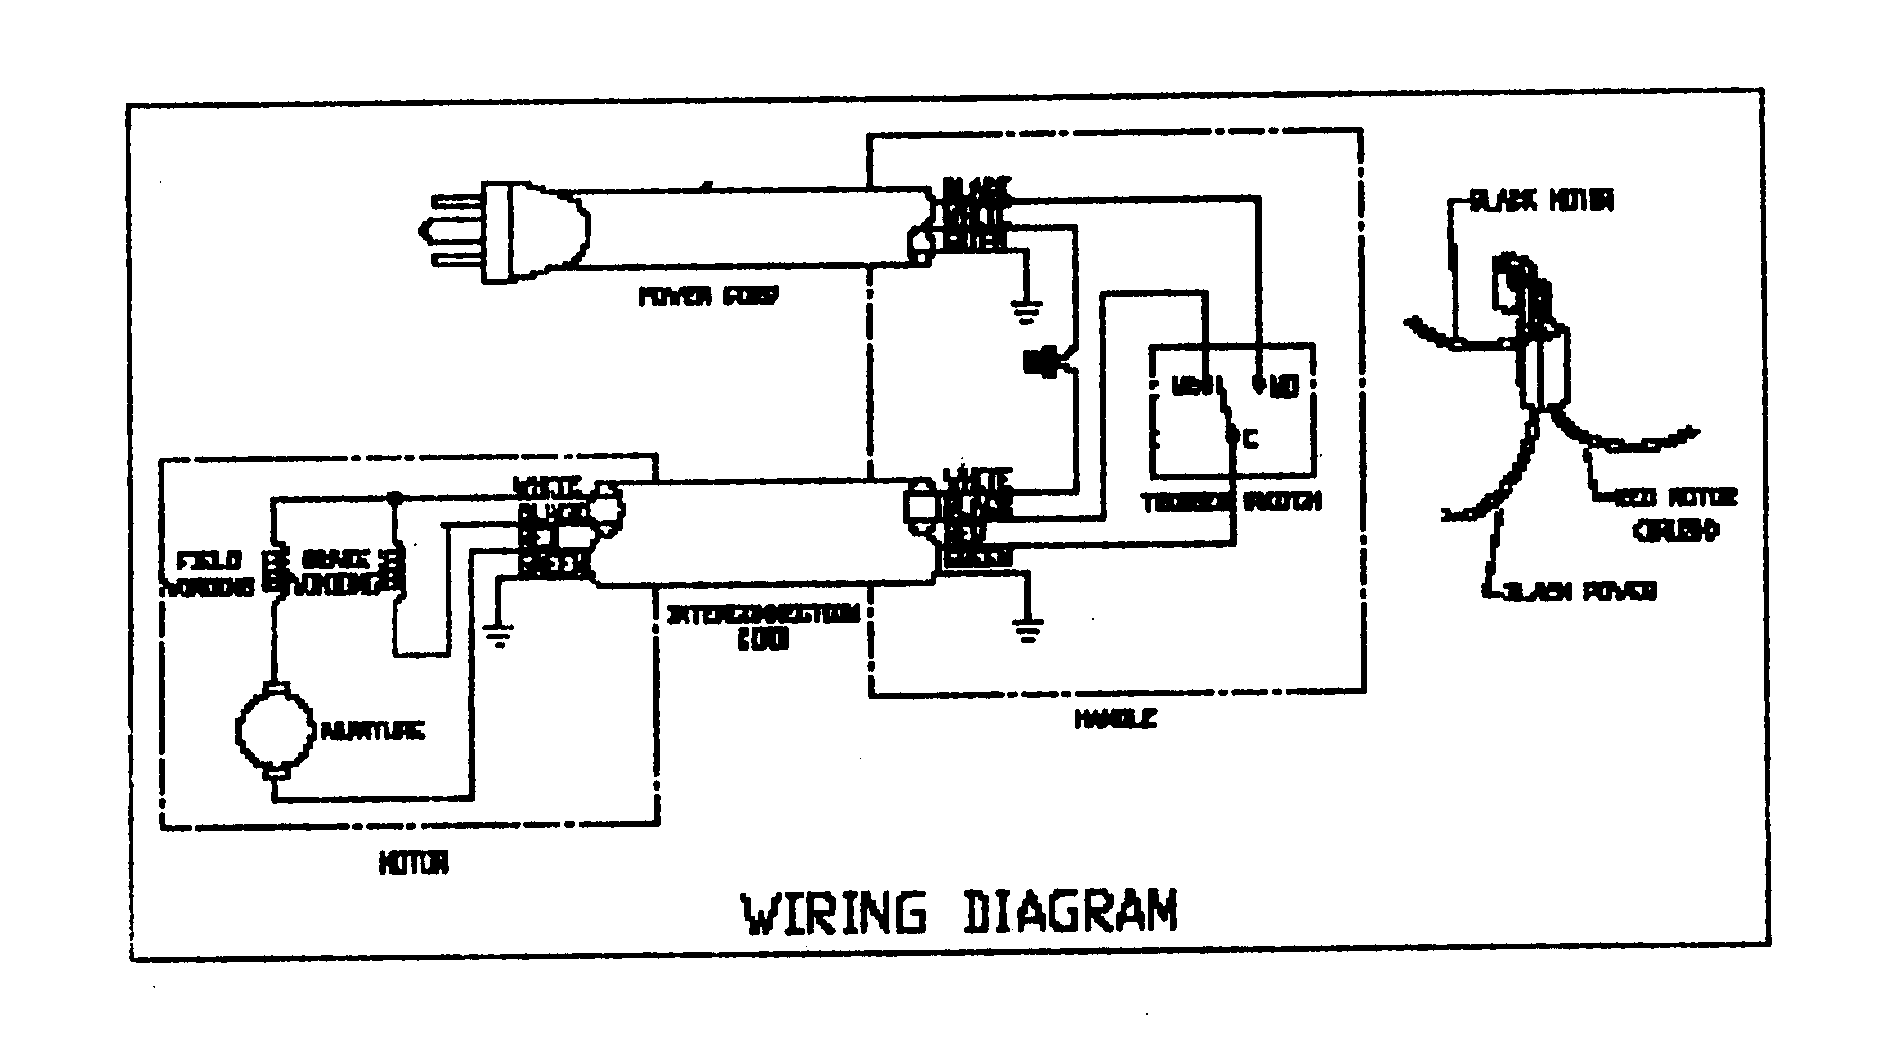 Delta Table Saw Motor Wiring Diagram from c.searspartsdirect.com